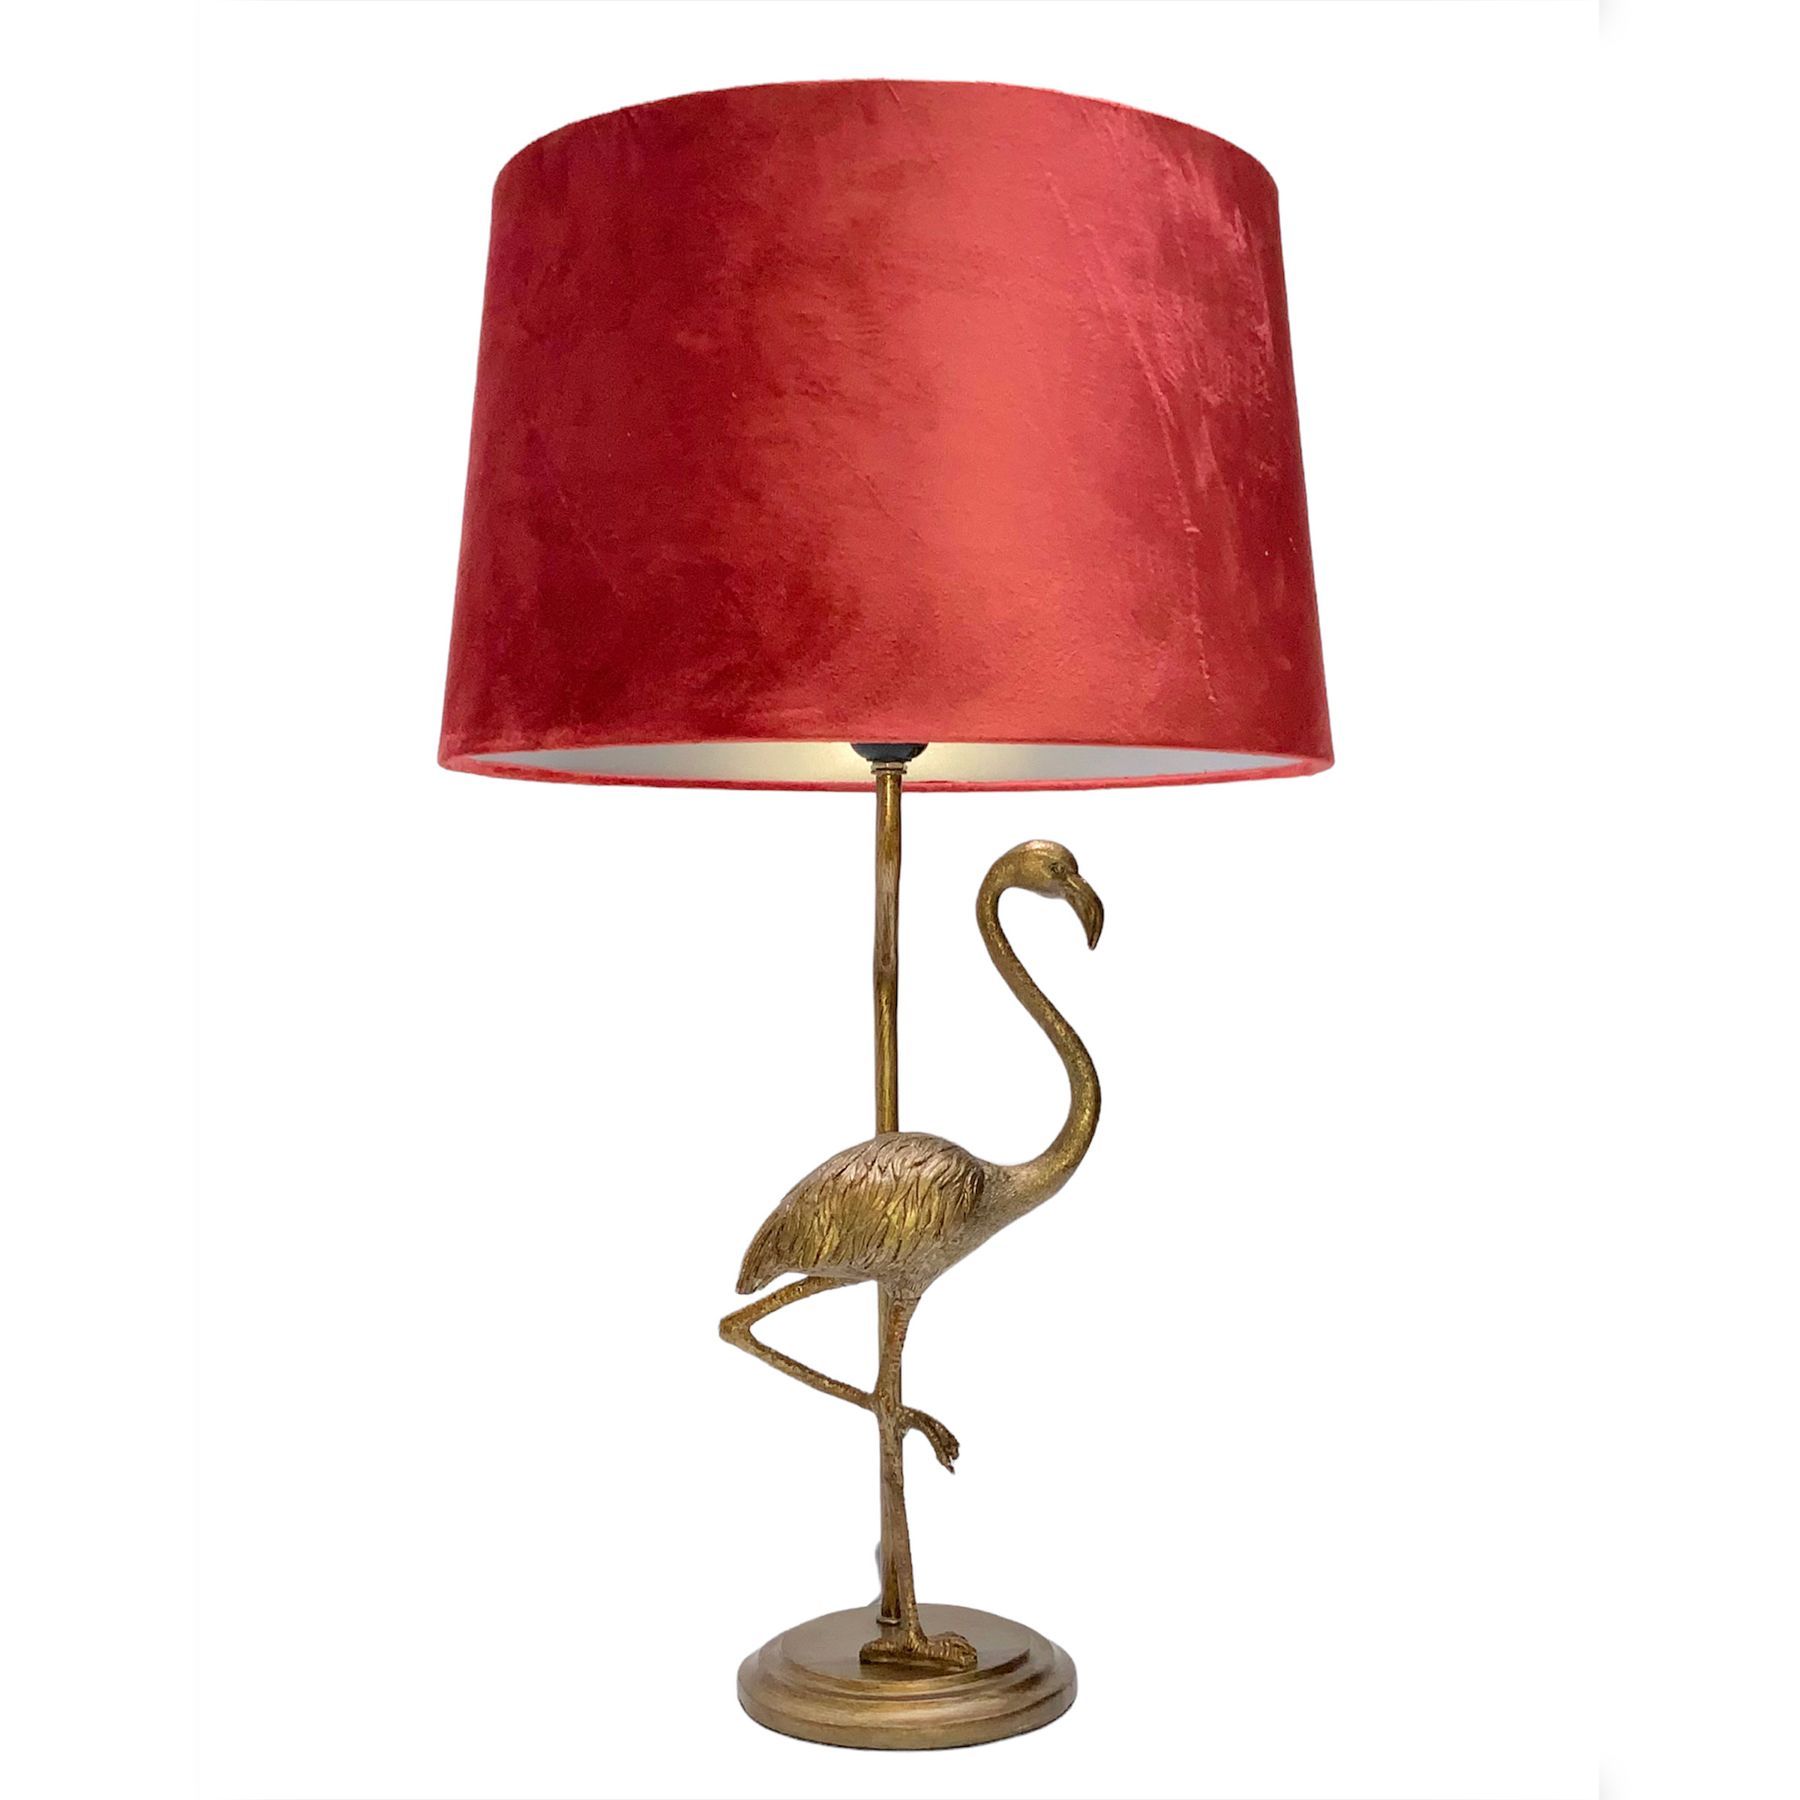 Antique Silver Flamingo Lamp With Coral Velvet Shade - Image 1